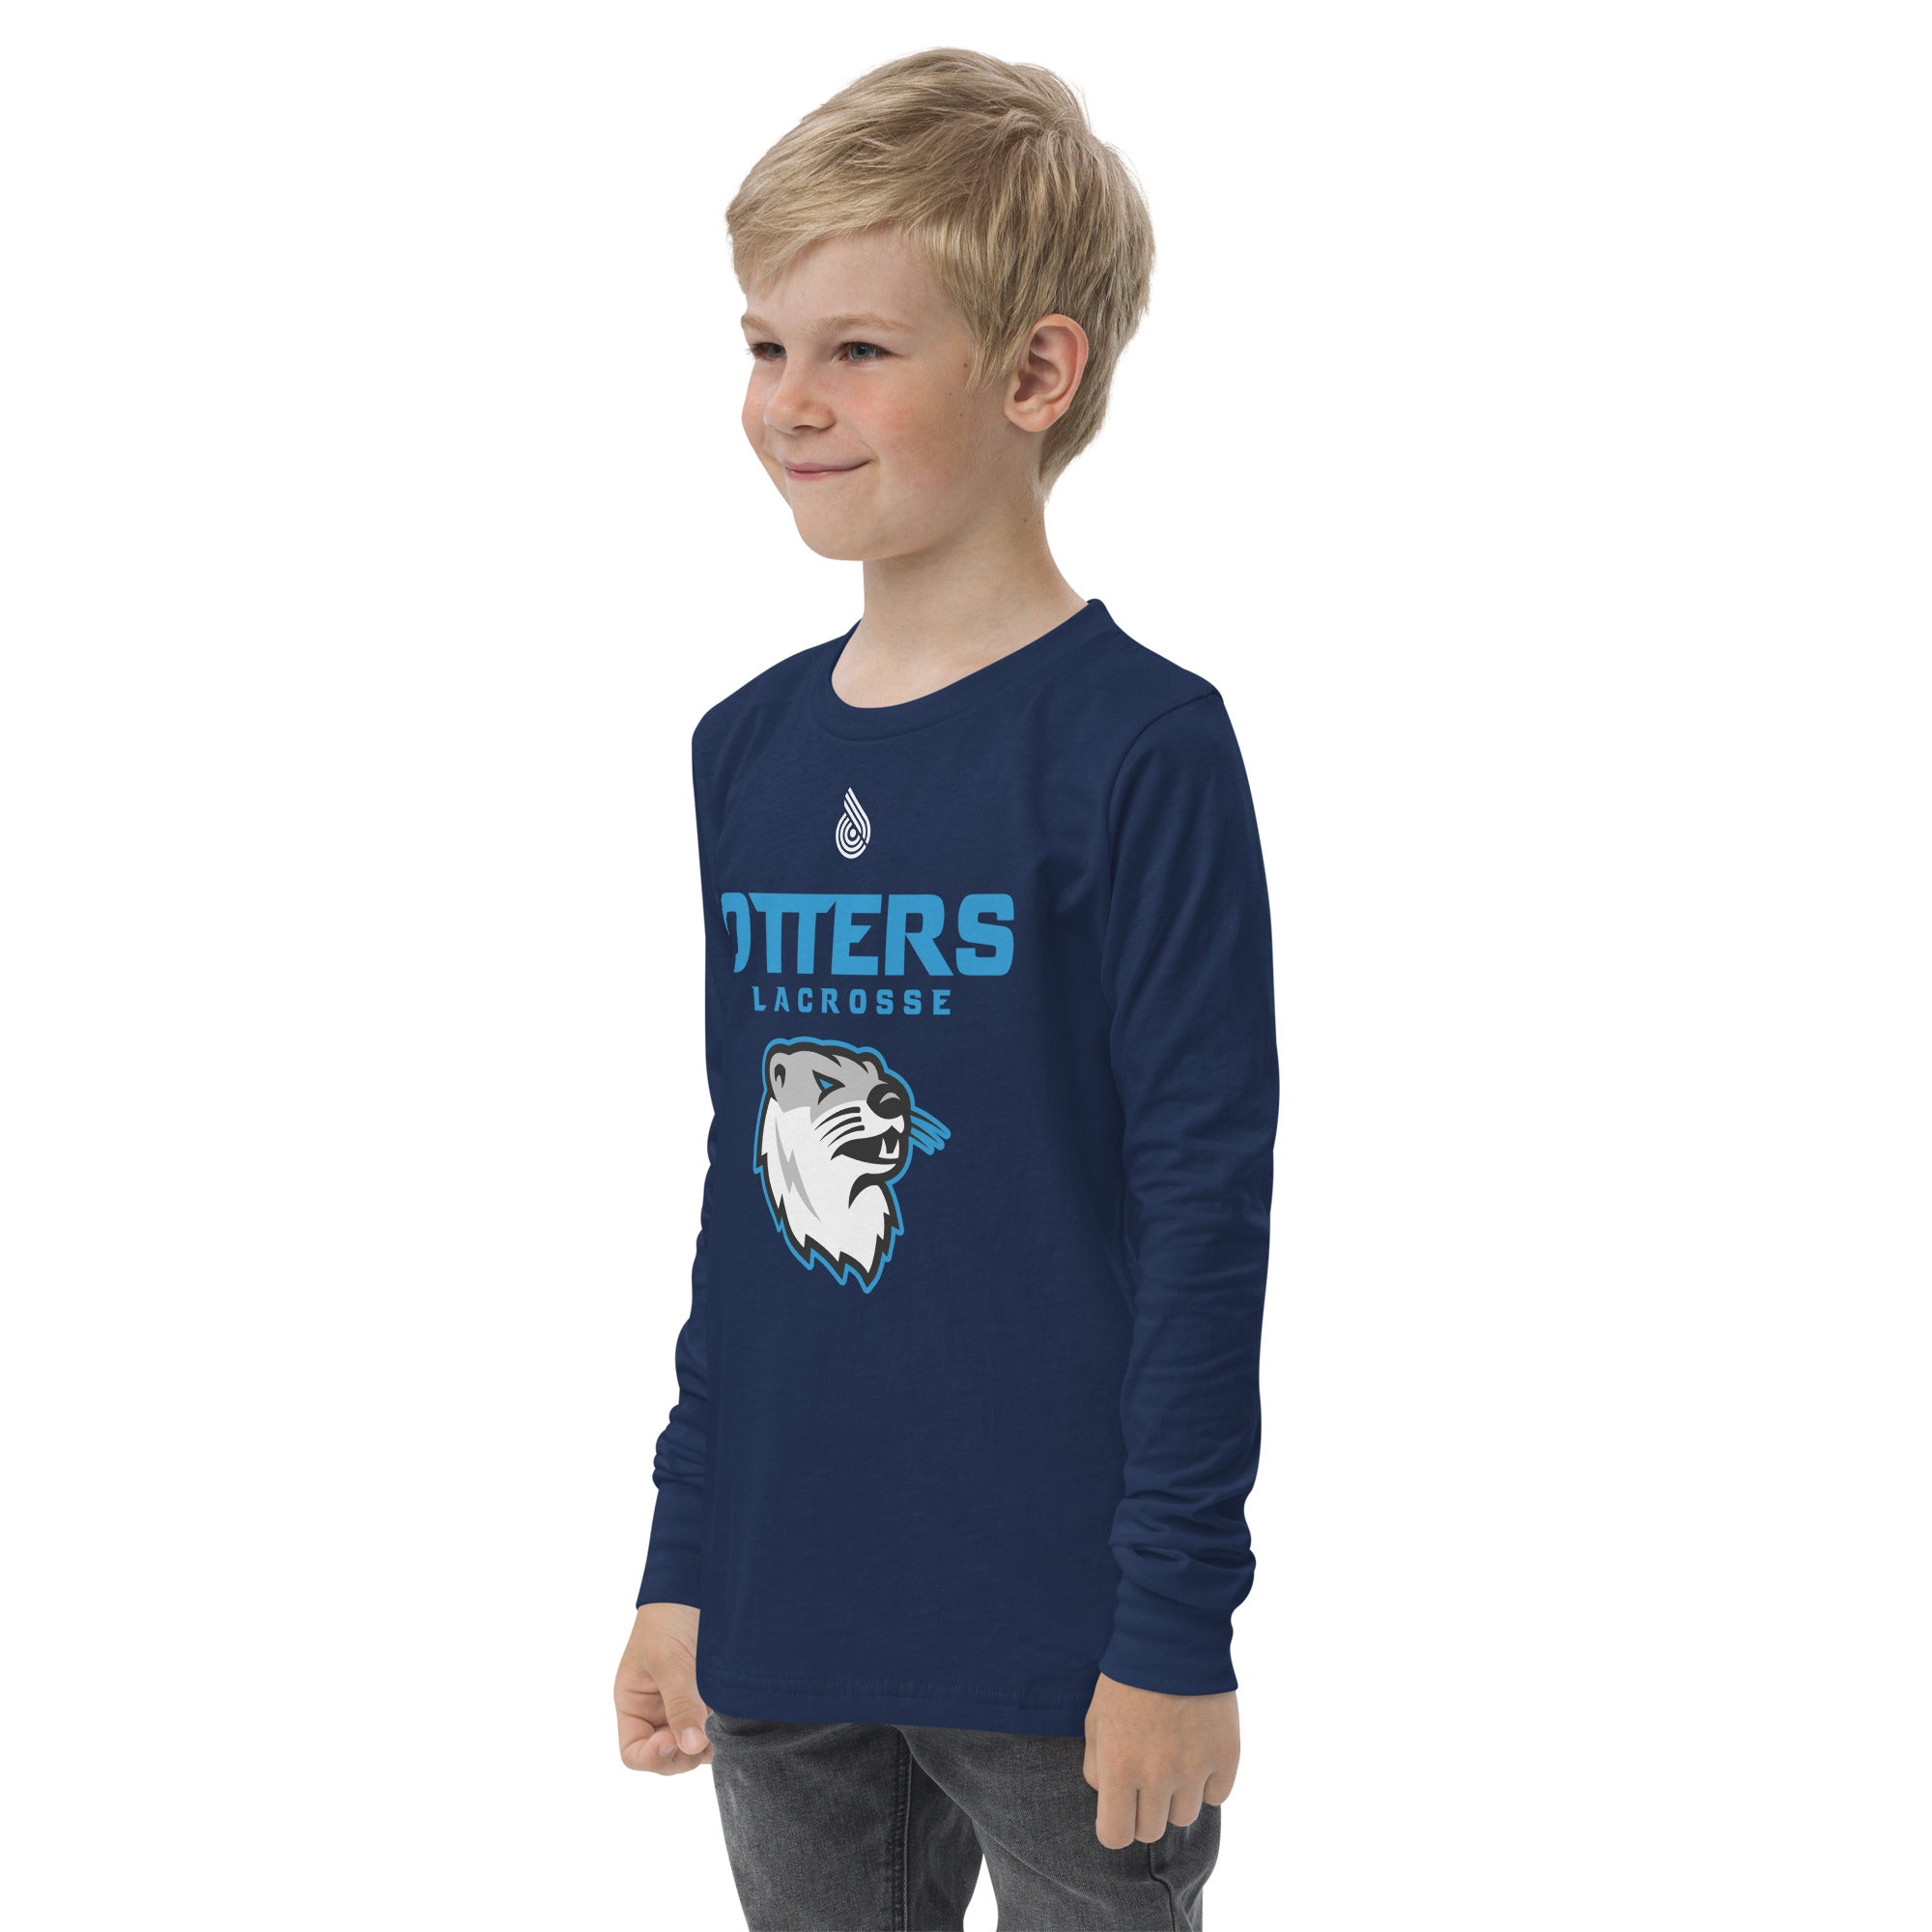 Otters Youth long sleeve tee